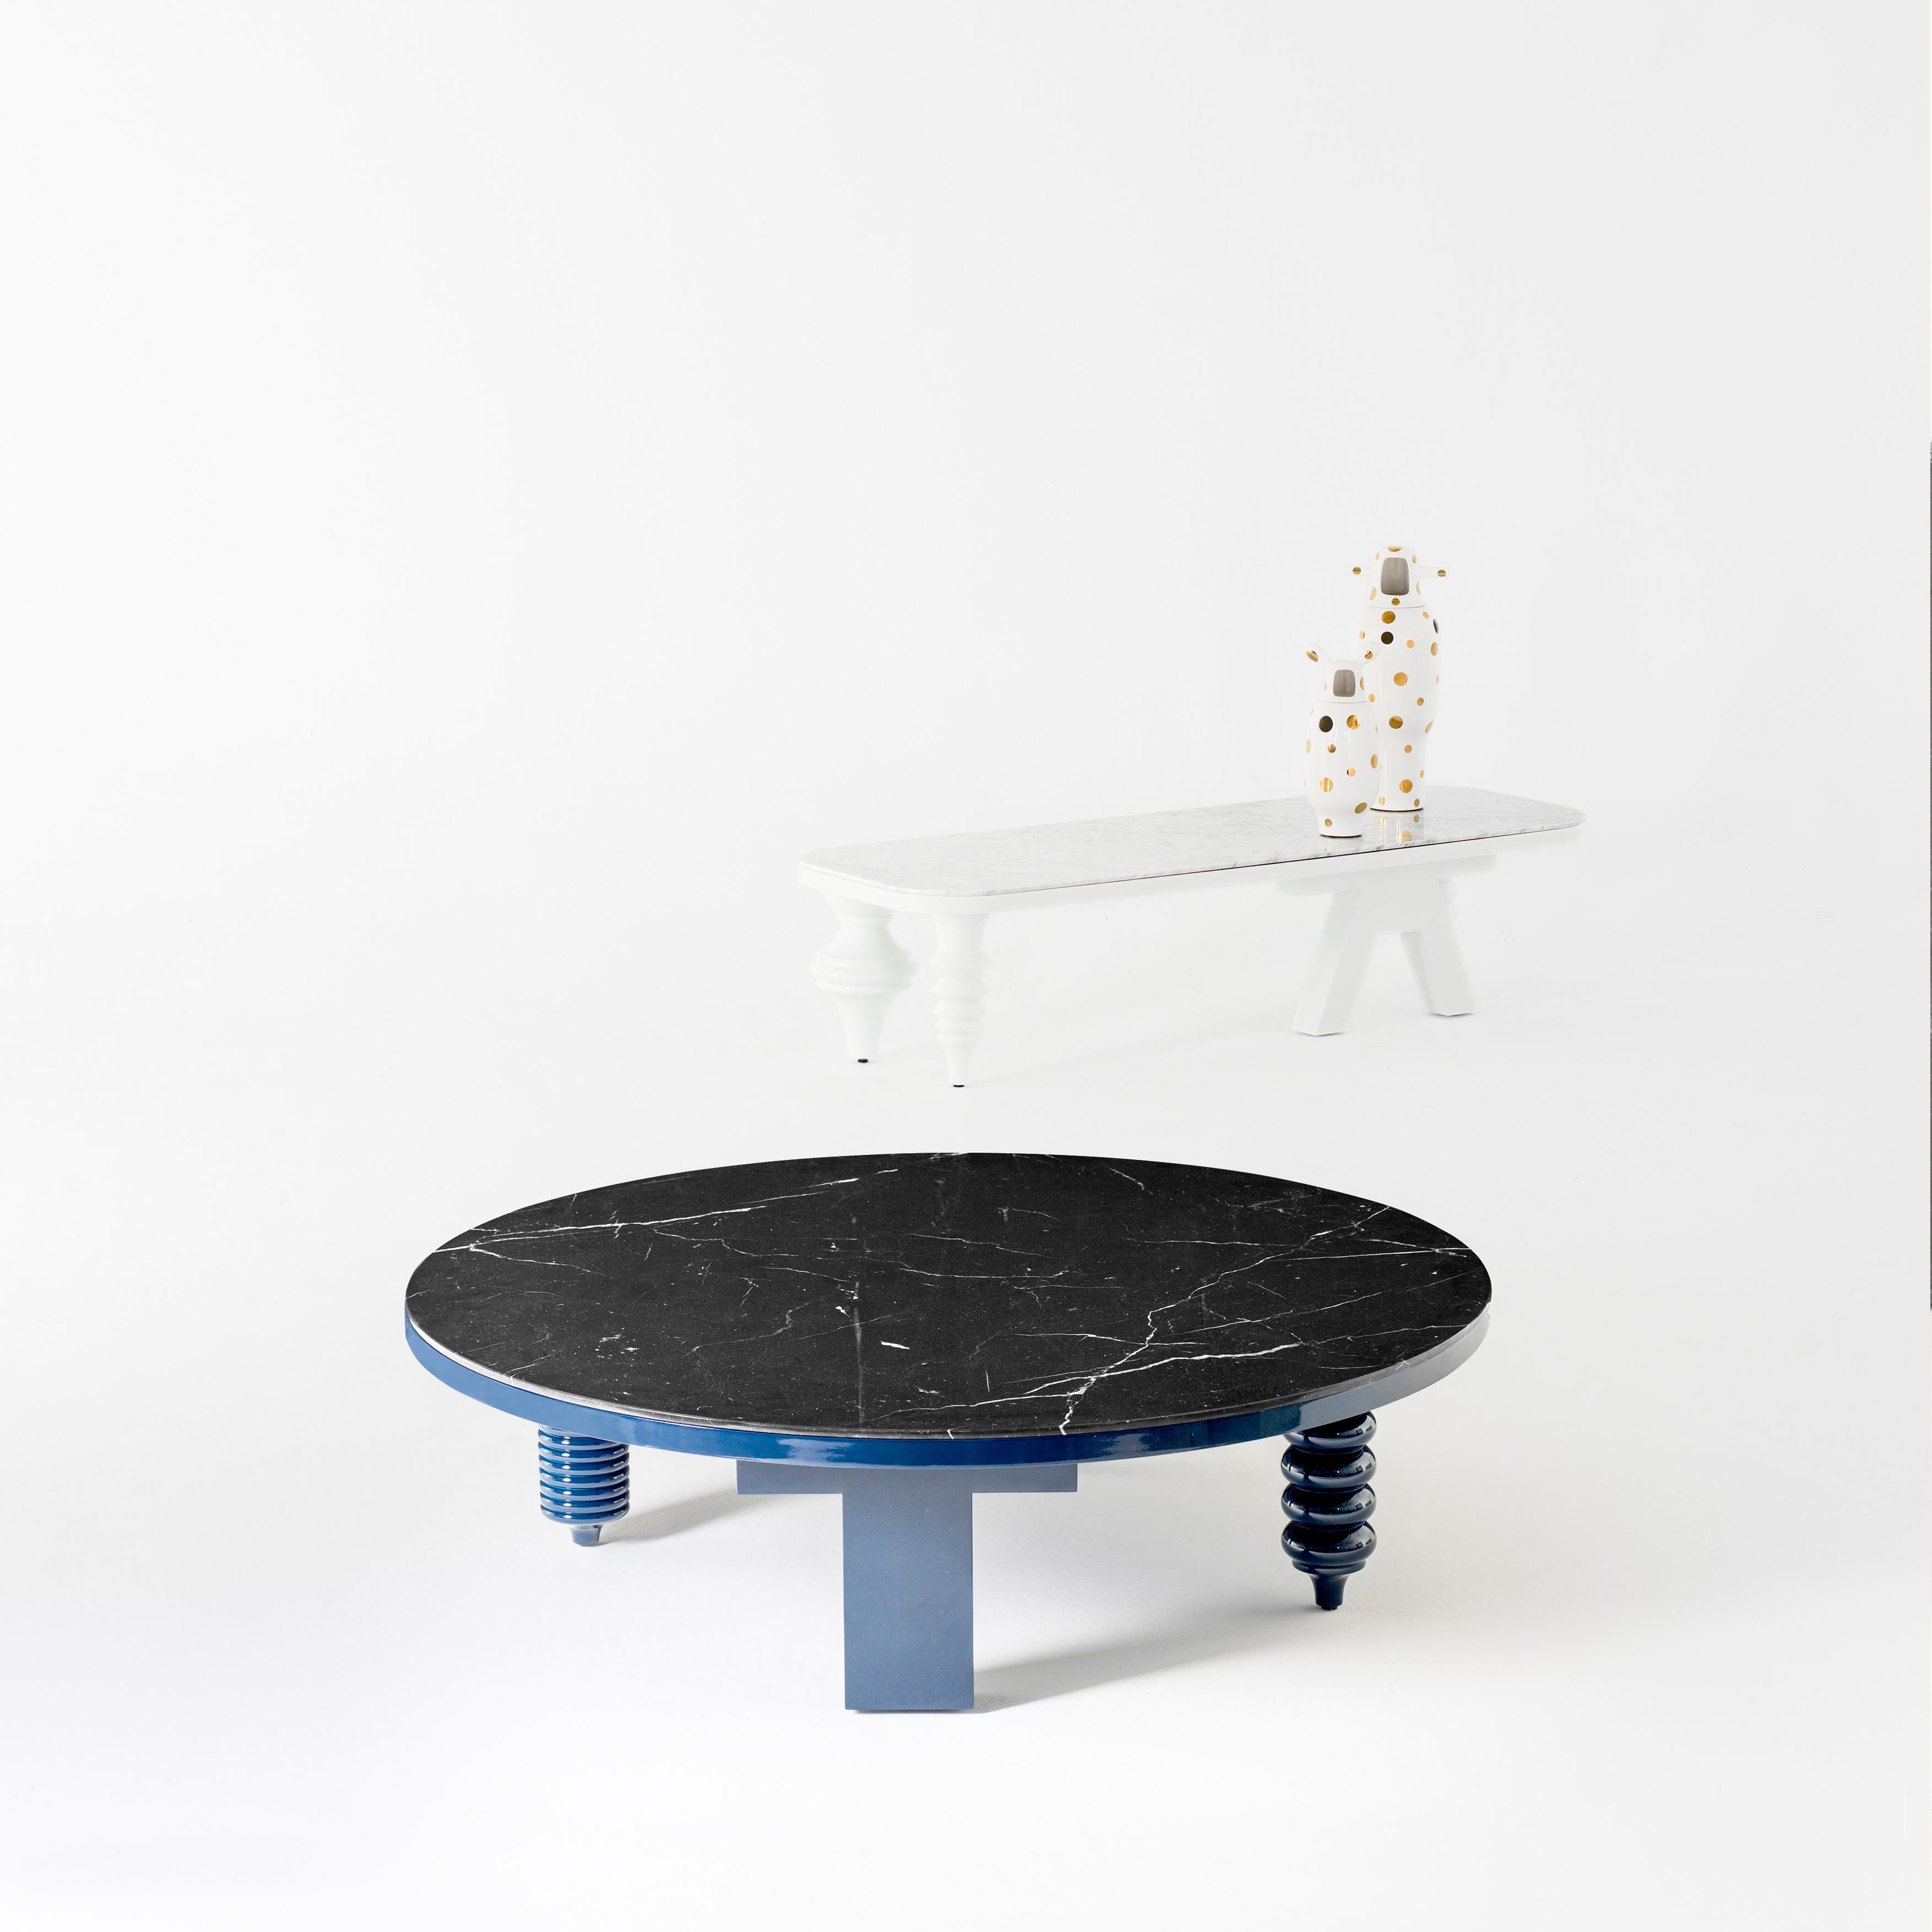 MDF base and legs in turned solid alder wood, lacquered in blue gloss 
Marble table tops in Carrara Venato or Nero Marquina.

Rounded table measures:
Ø 80/120 x H 35 cm.